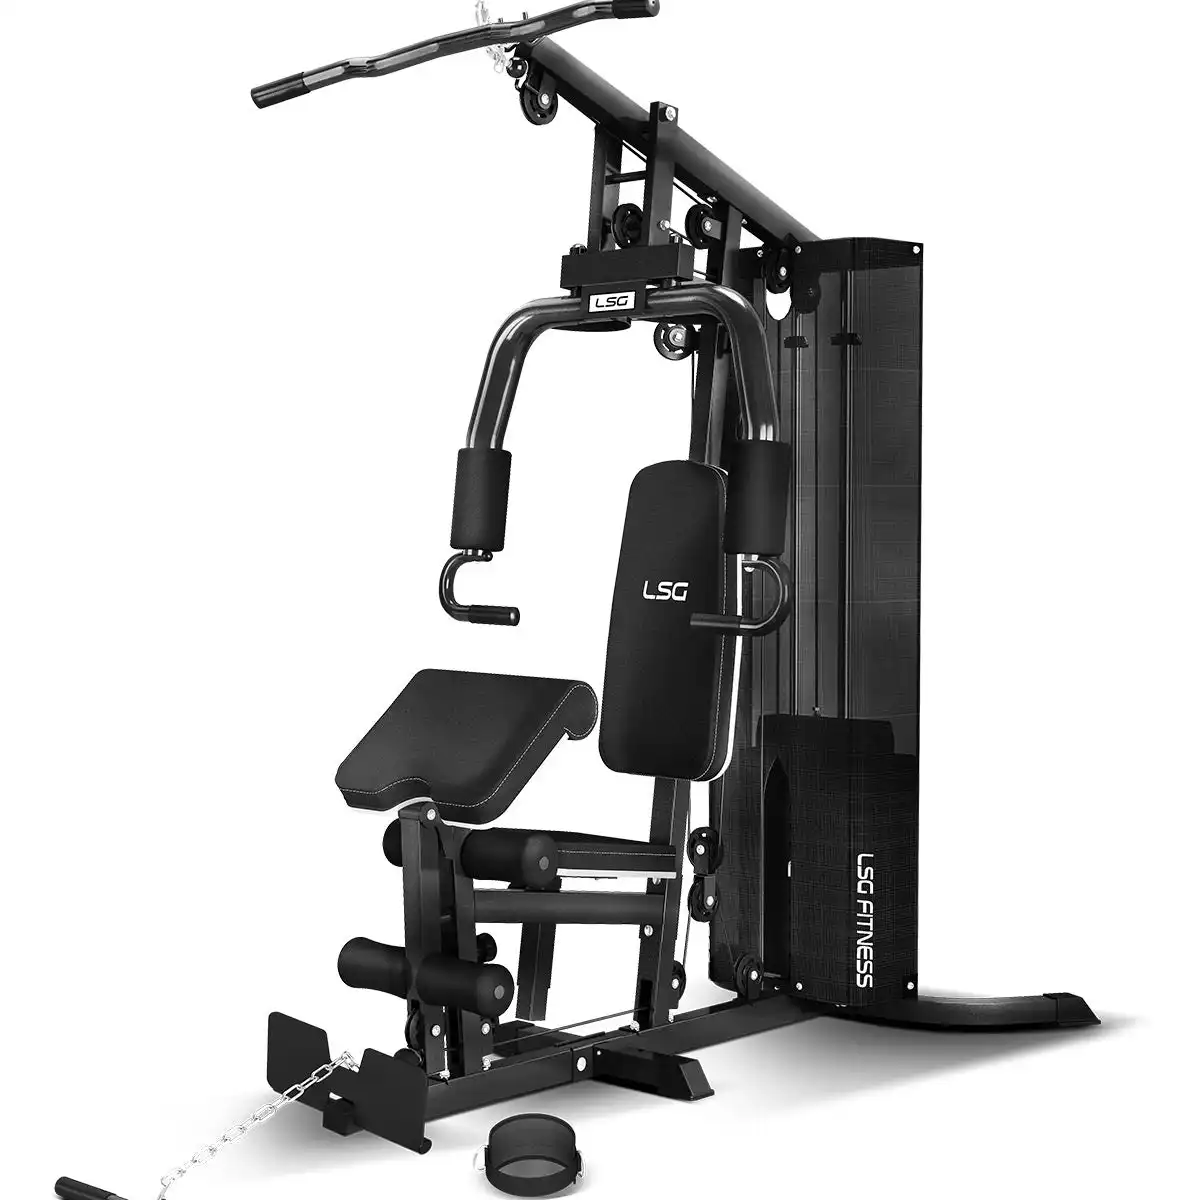 NEW LSG SSN105 All-In-One Single Gym Station Pulley Cable Machine Home Gym 74kg